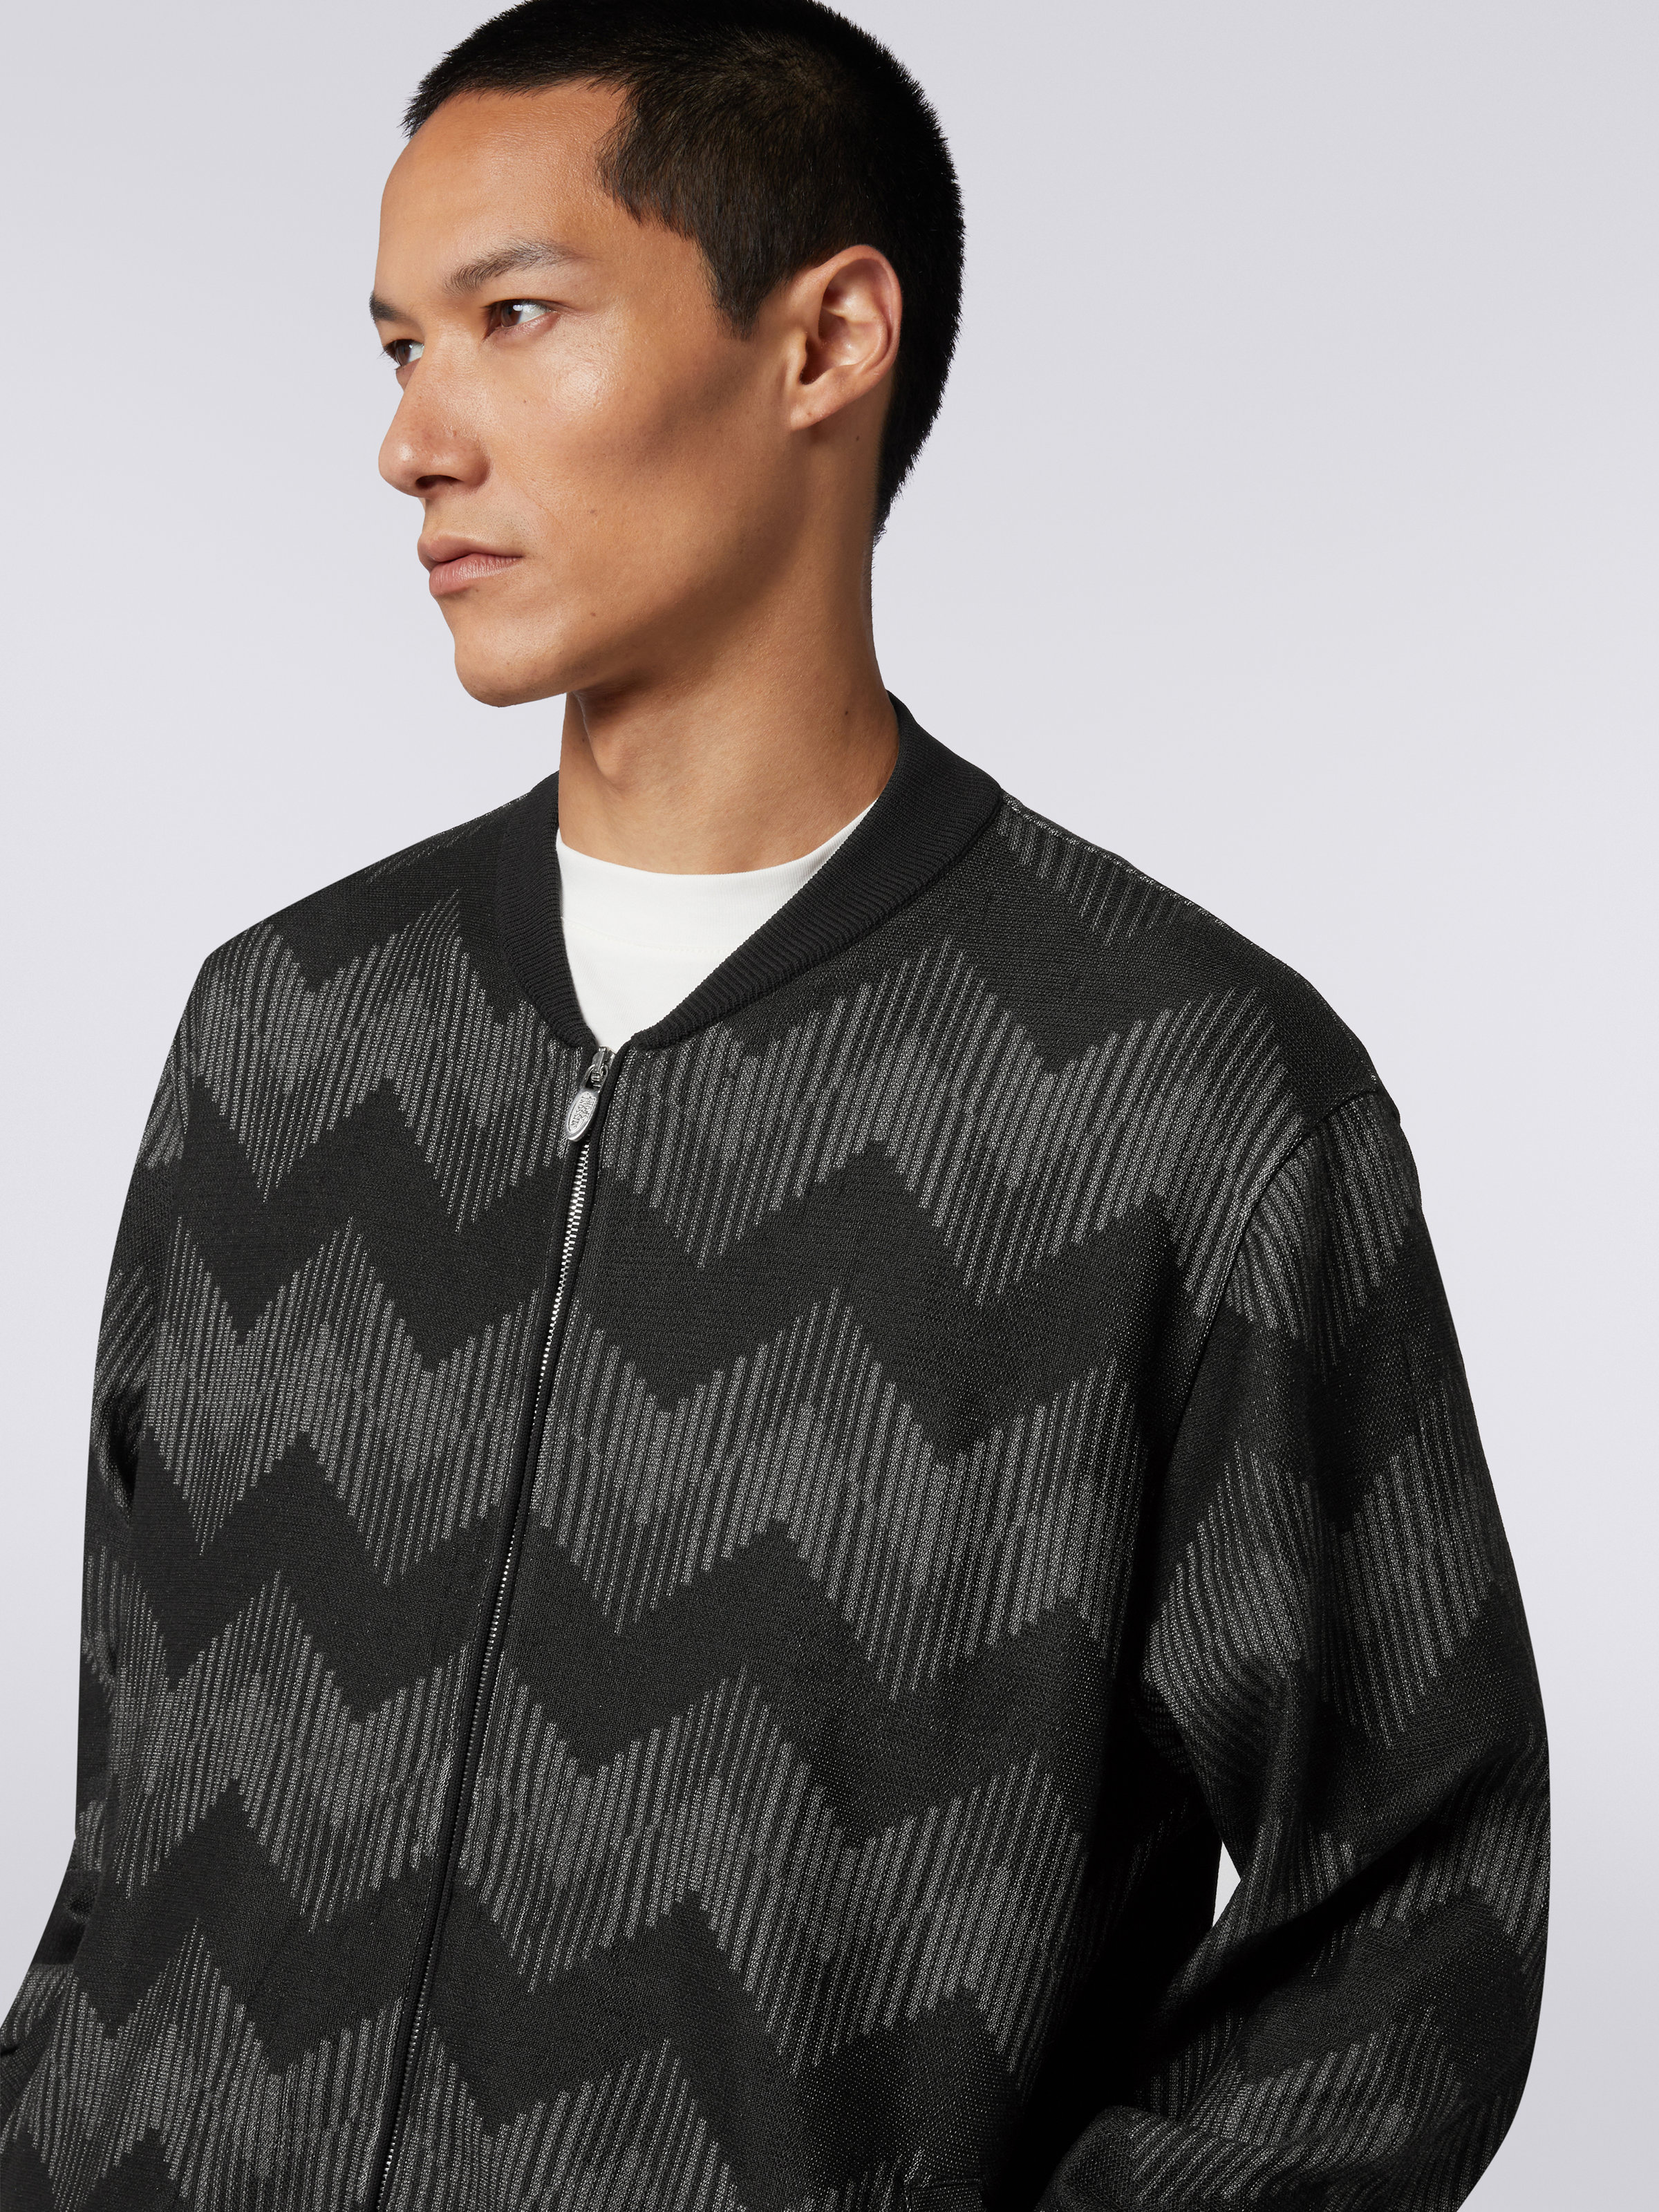 Cotton blend zigzag bomber jacket in collaboration with Mike Maignan, Black & White - 4